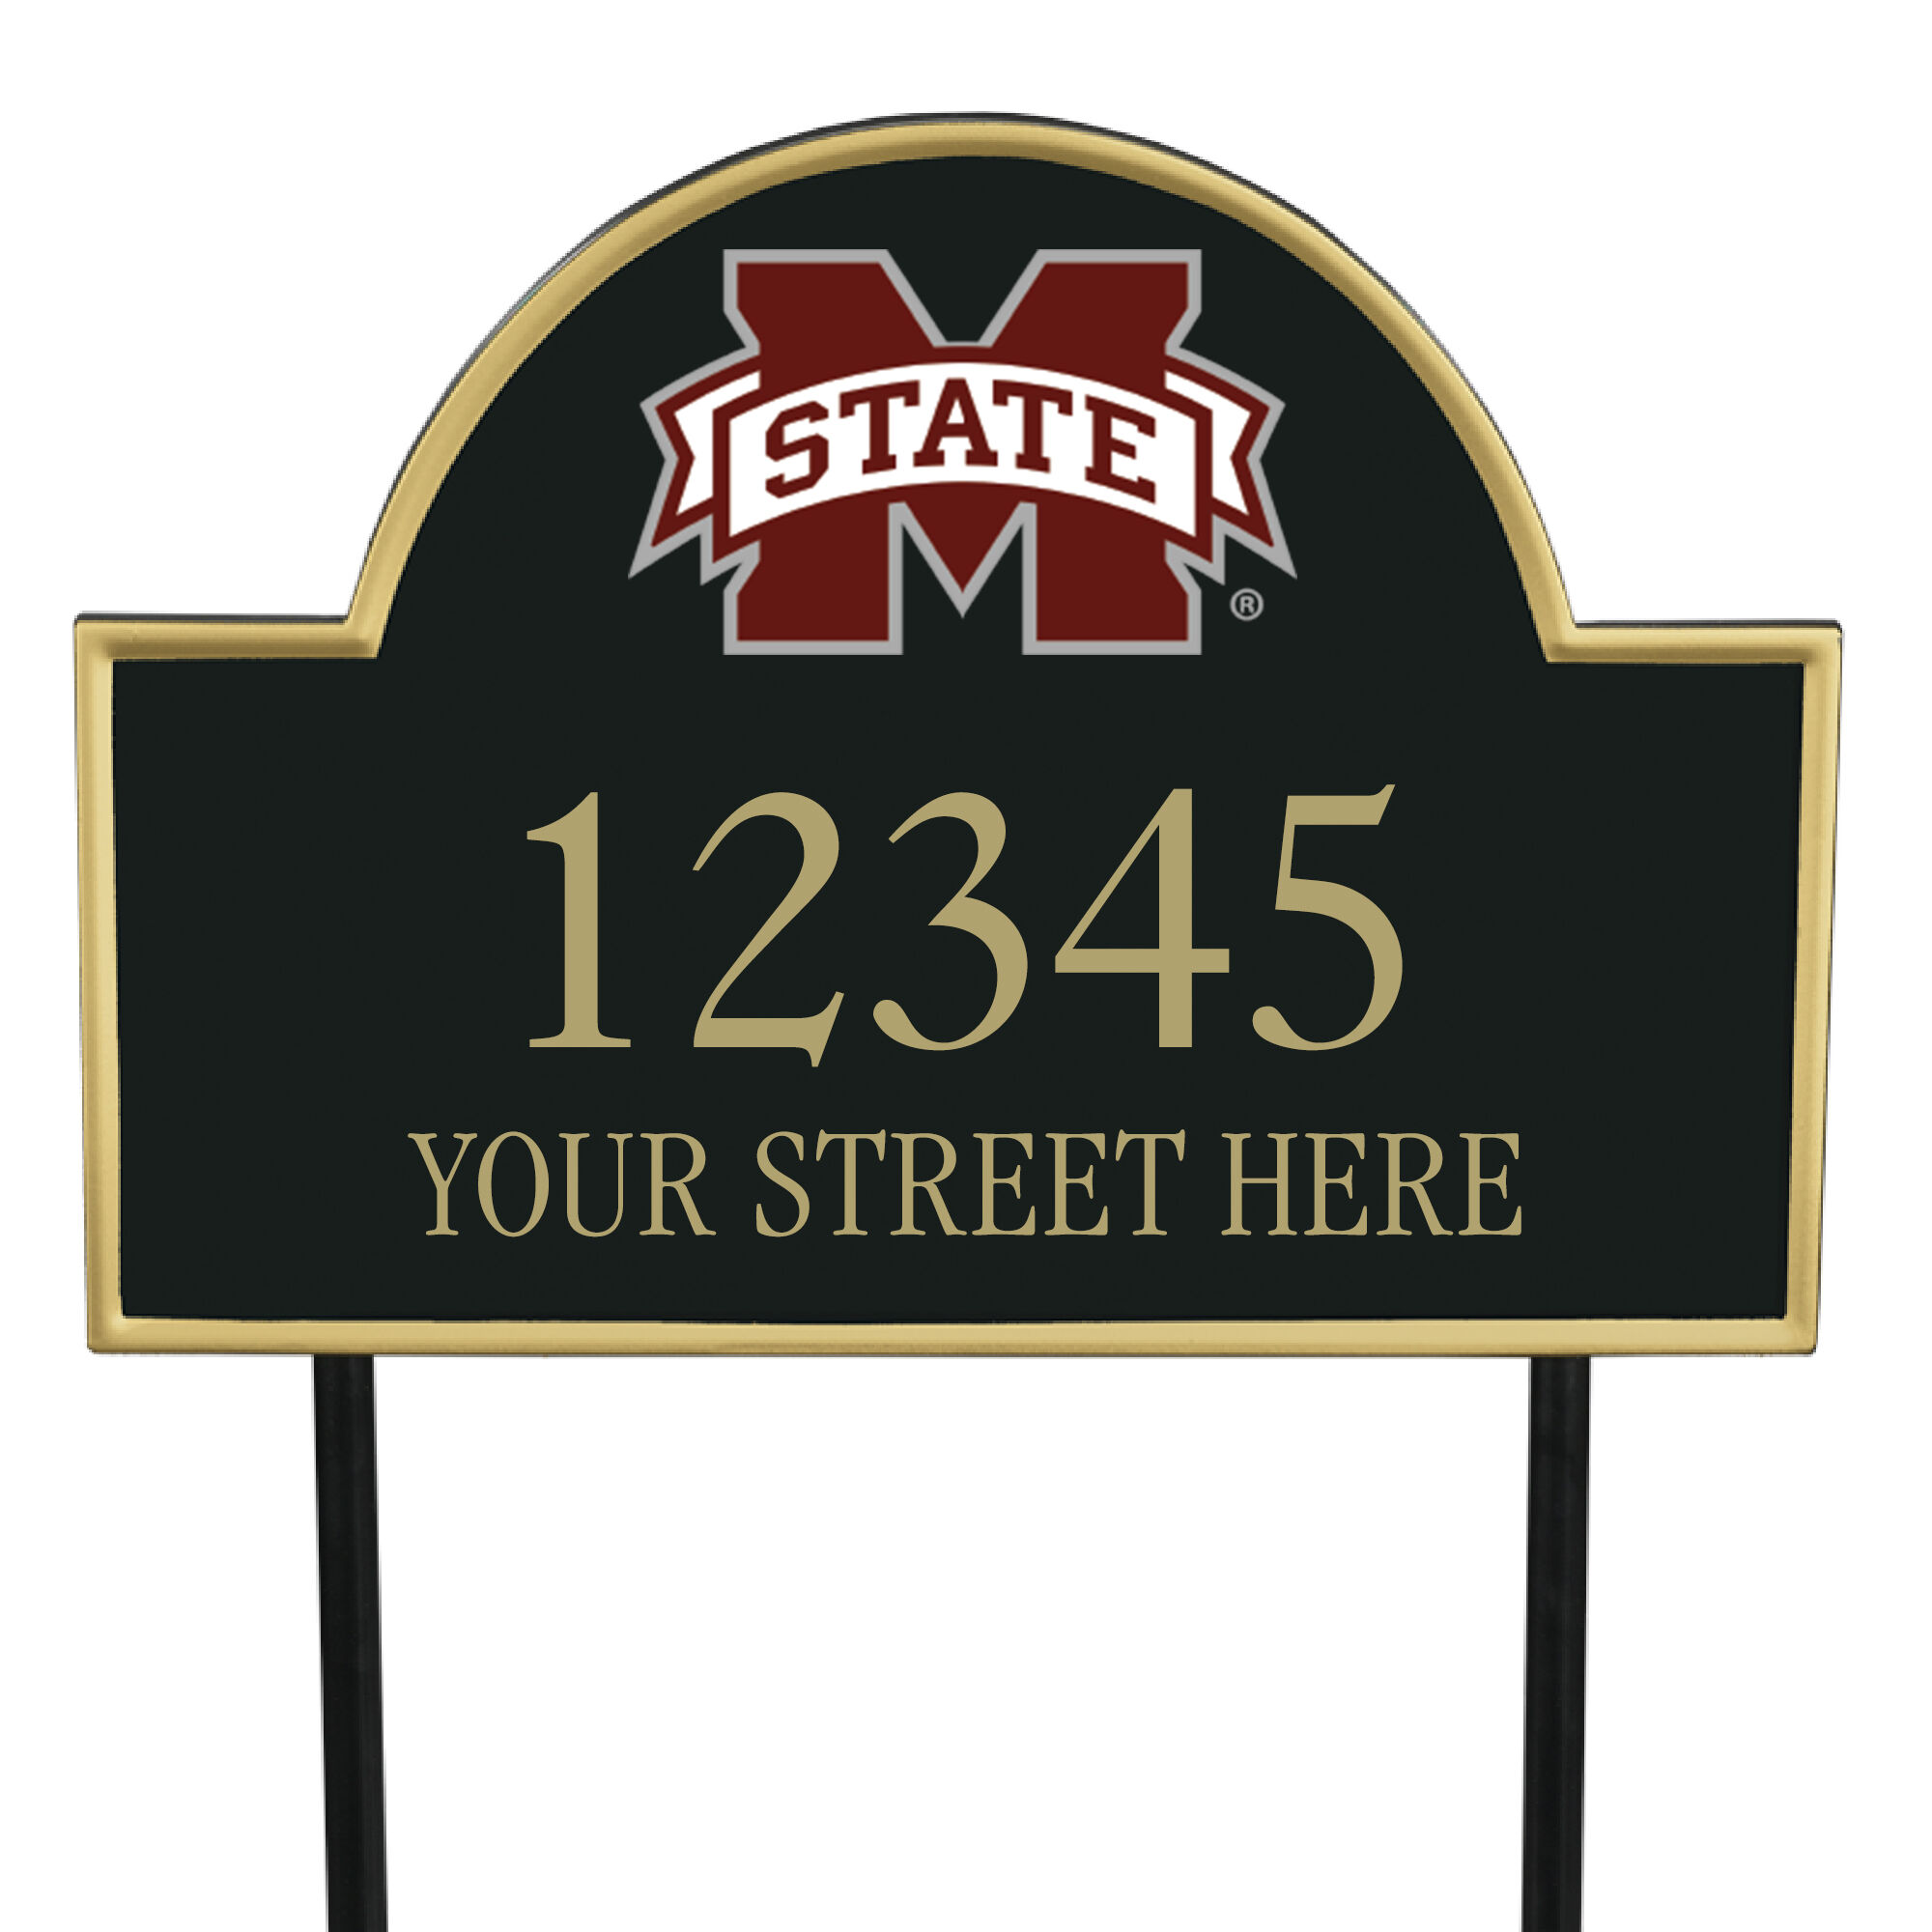 The College Personalized Address Plaque 5716 0384 b Mississippi State